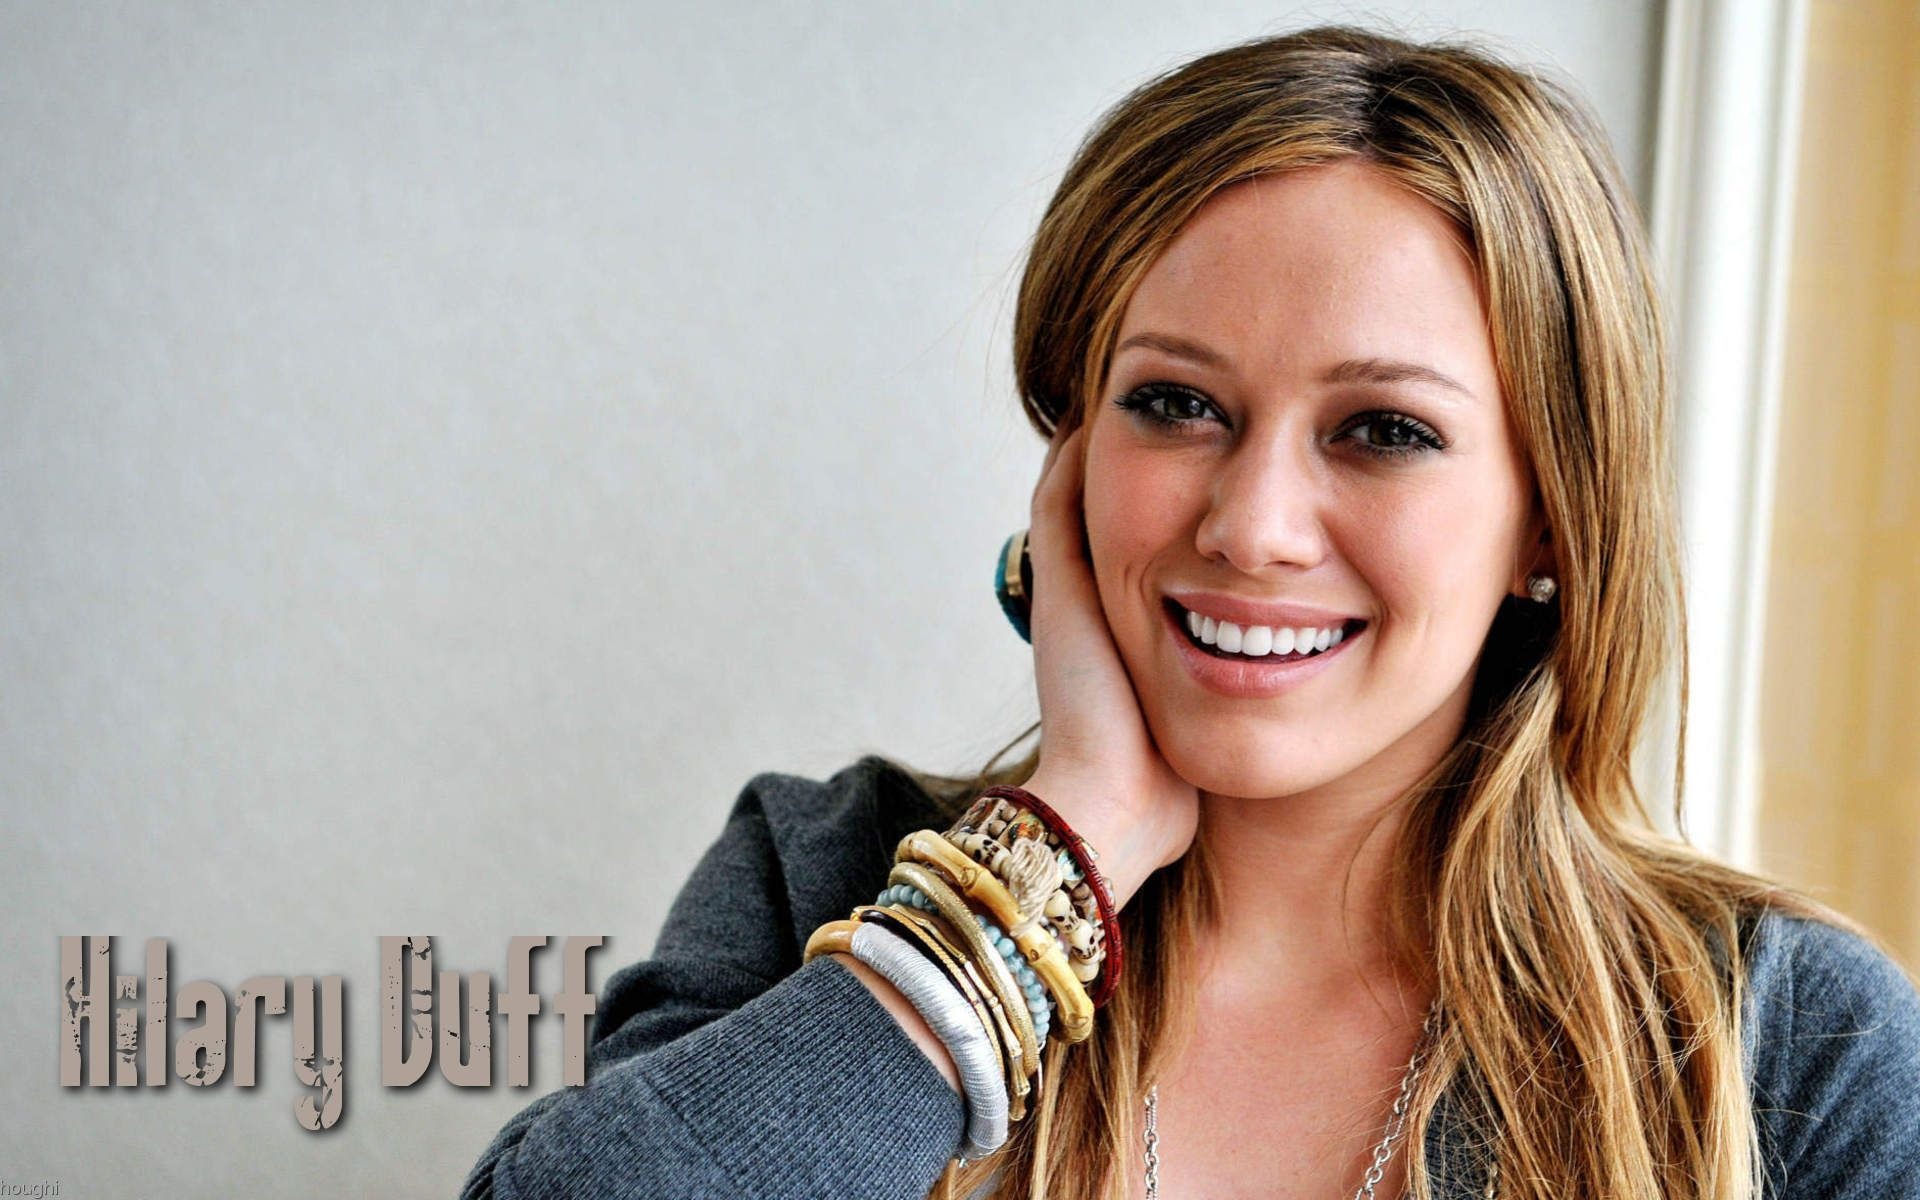 Hilary Duff #061 - 1920x1200 Wallpapers Pictures Photos Images